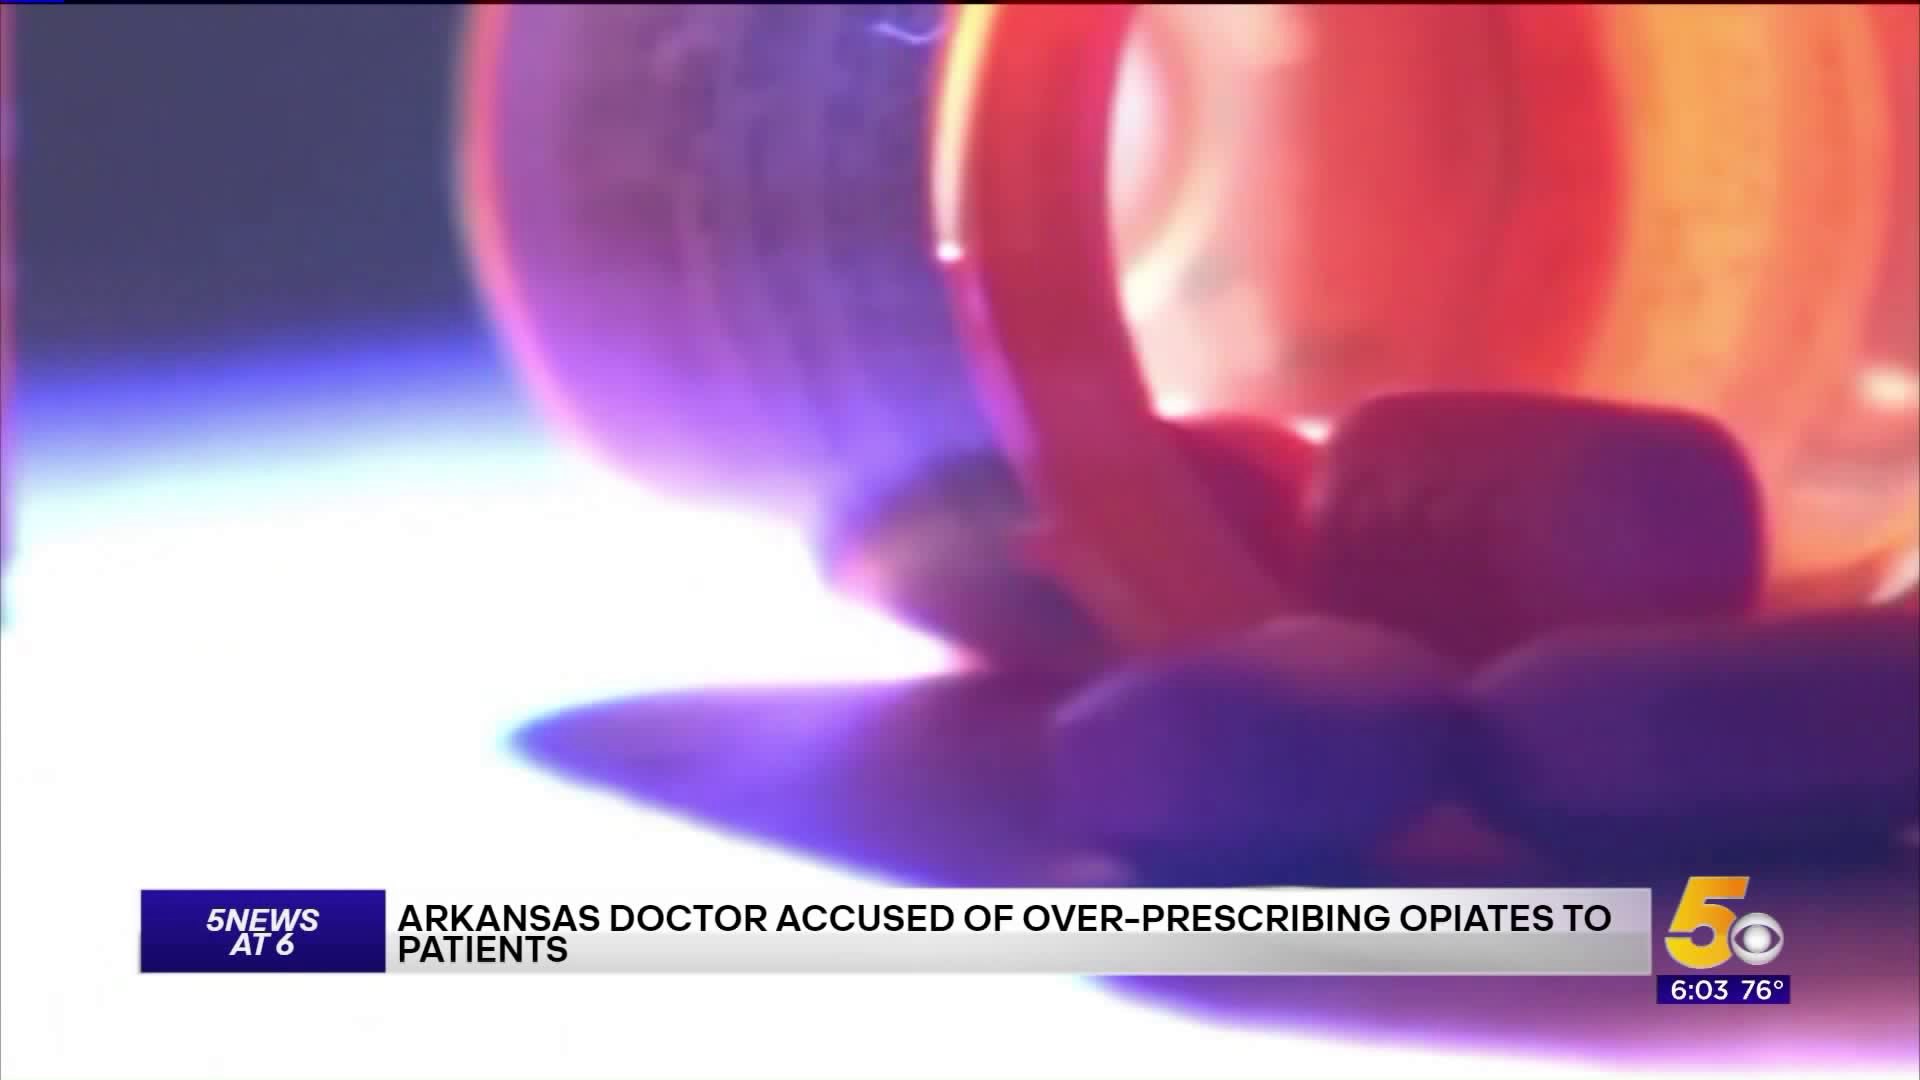 Drug Charges Filed Against Arkansas Doctor With Troubled Past